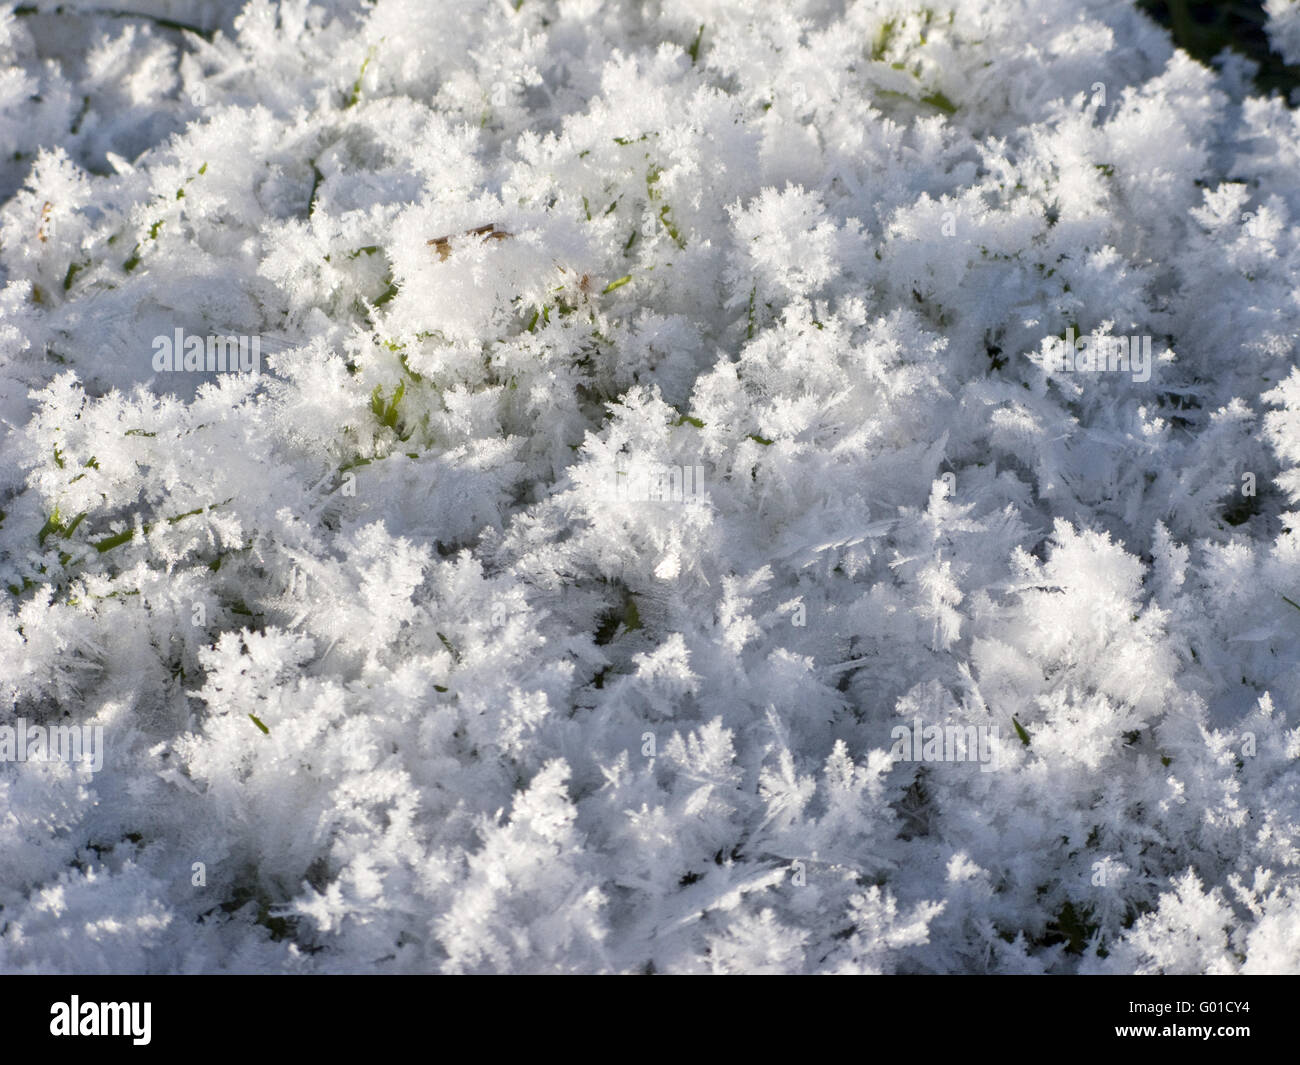 Texture of snow surface with acicular crystals on sunny day Stock Photo